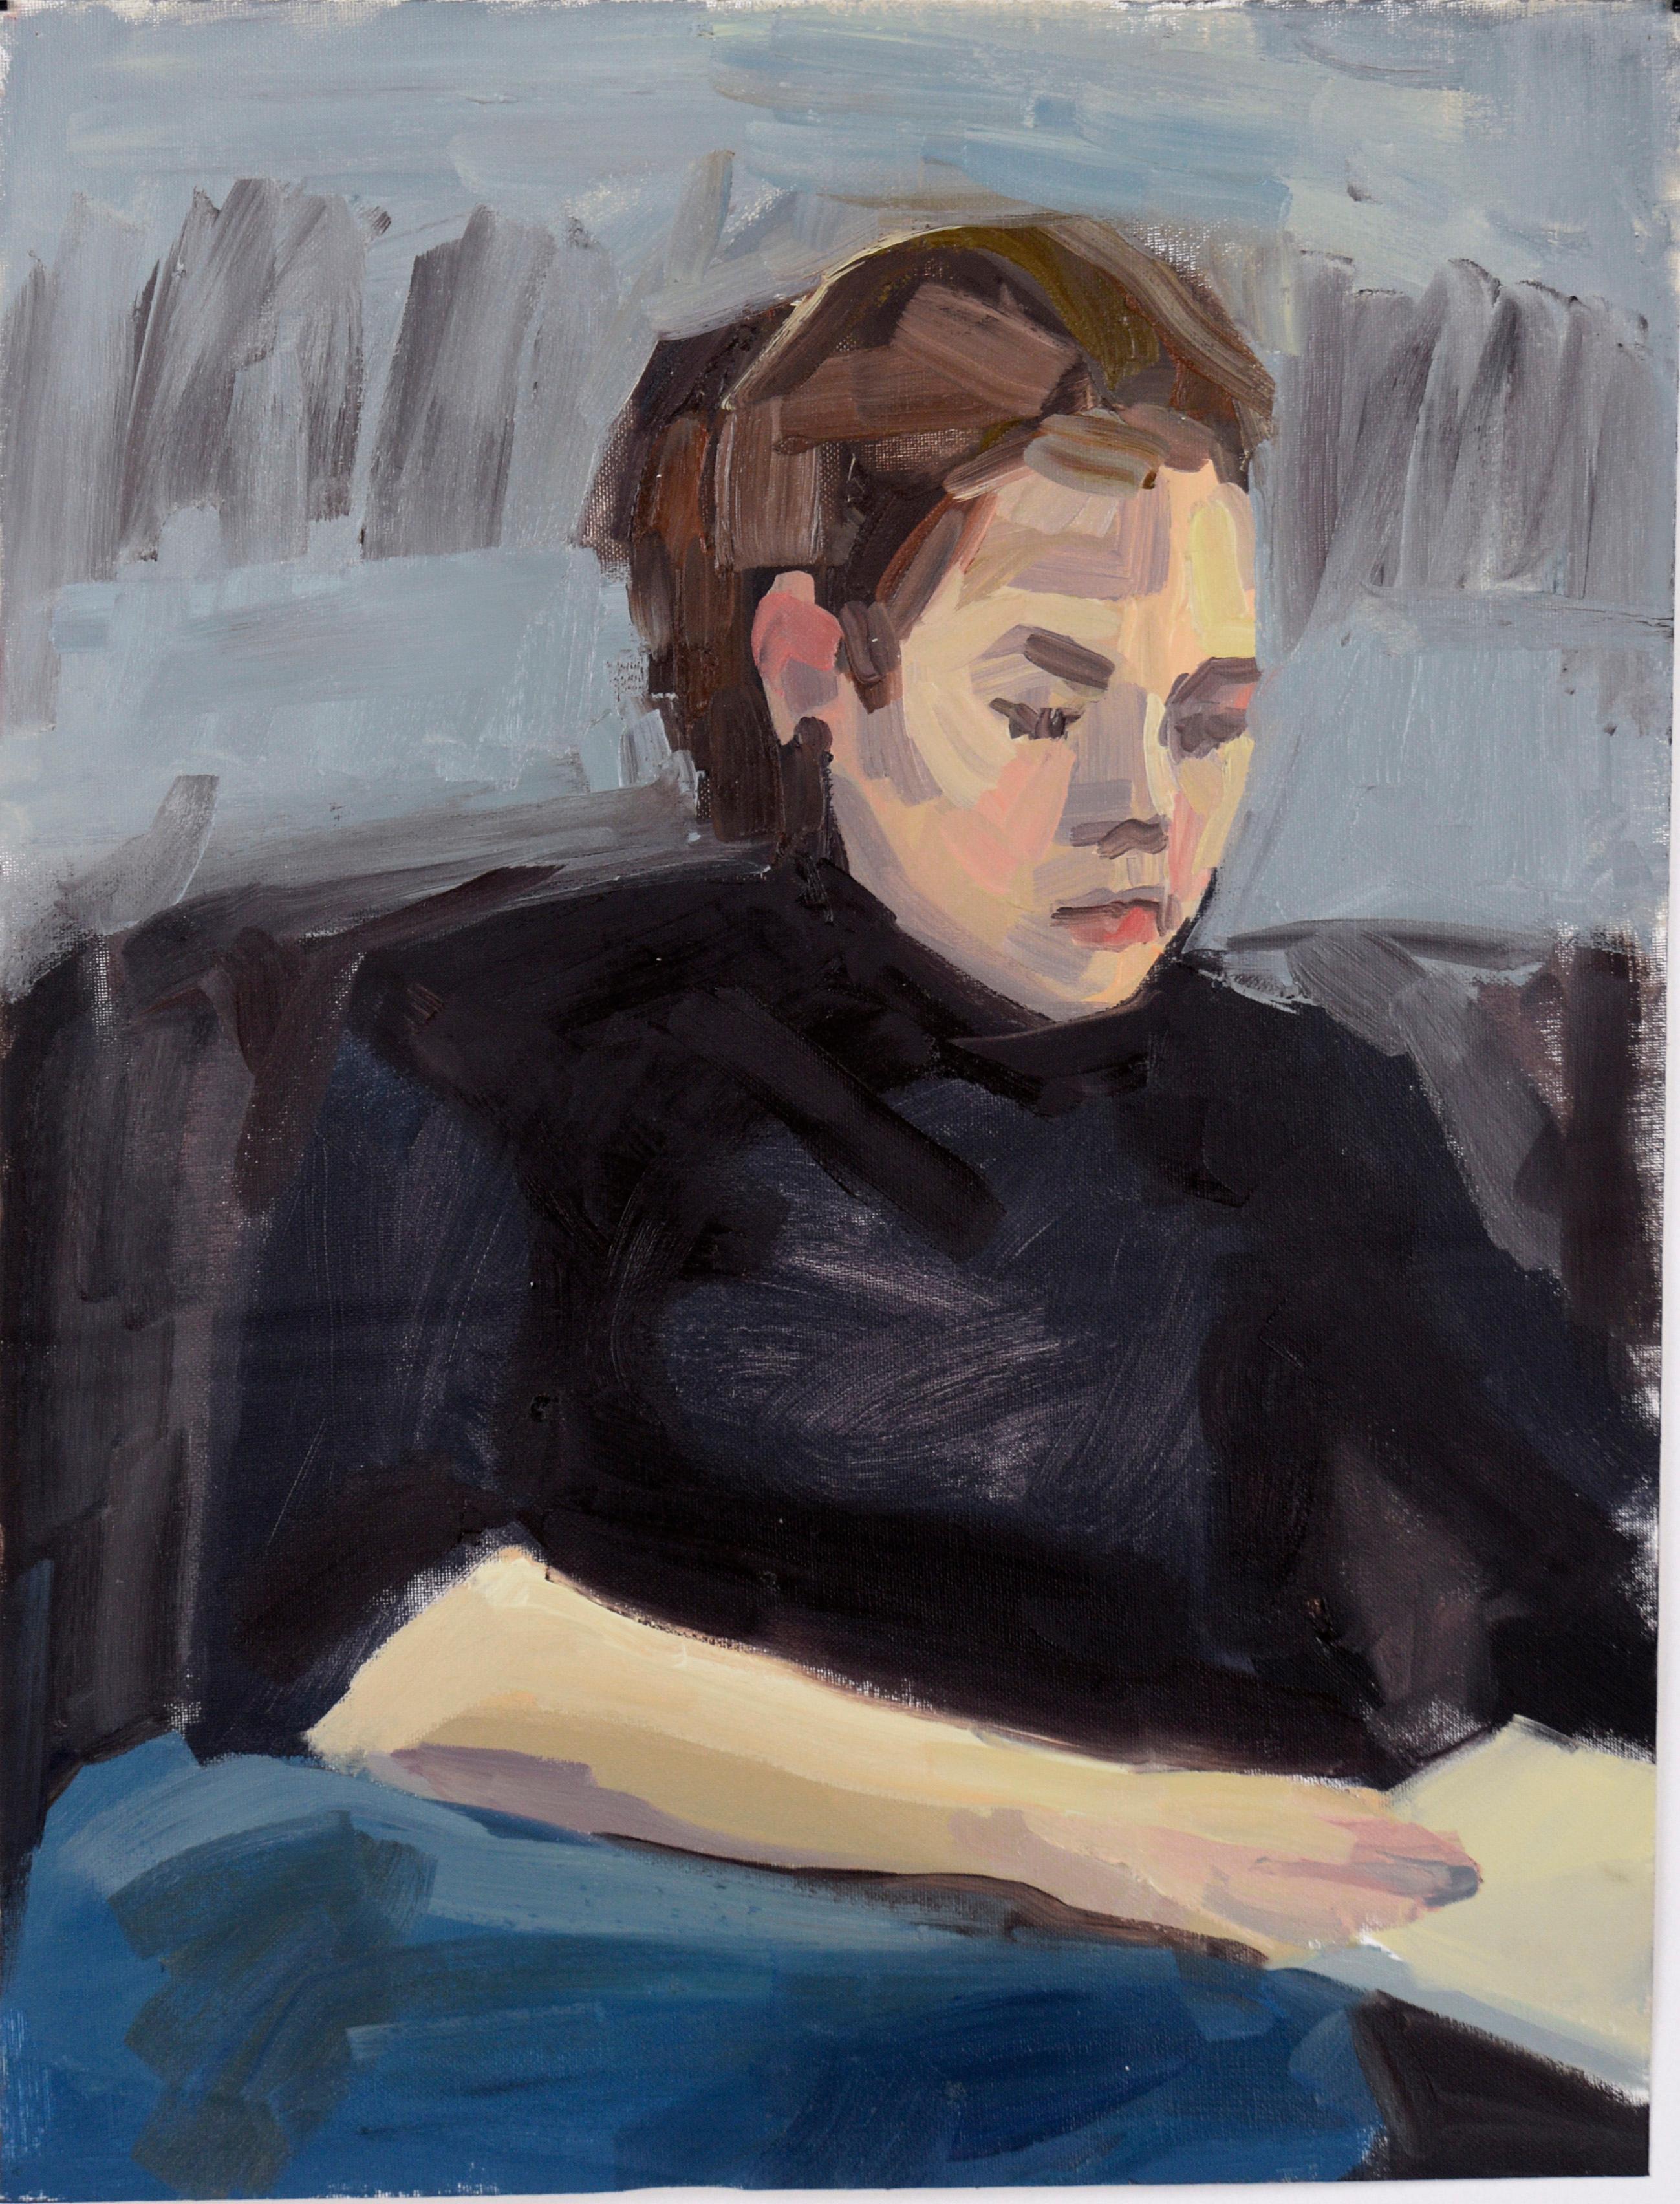 Heather Speck Figurative Painting - Portrait of a Woman Reading - Bay Area Figurative School Abstract Expressionist